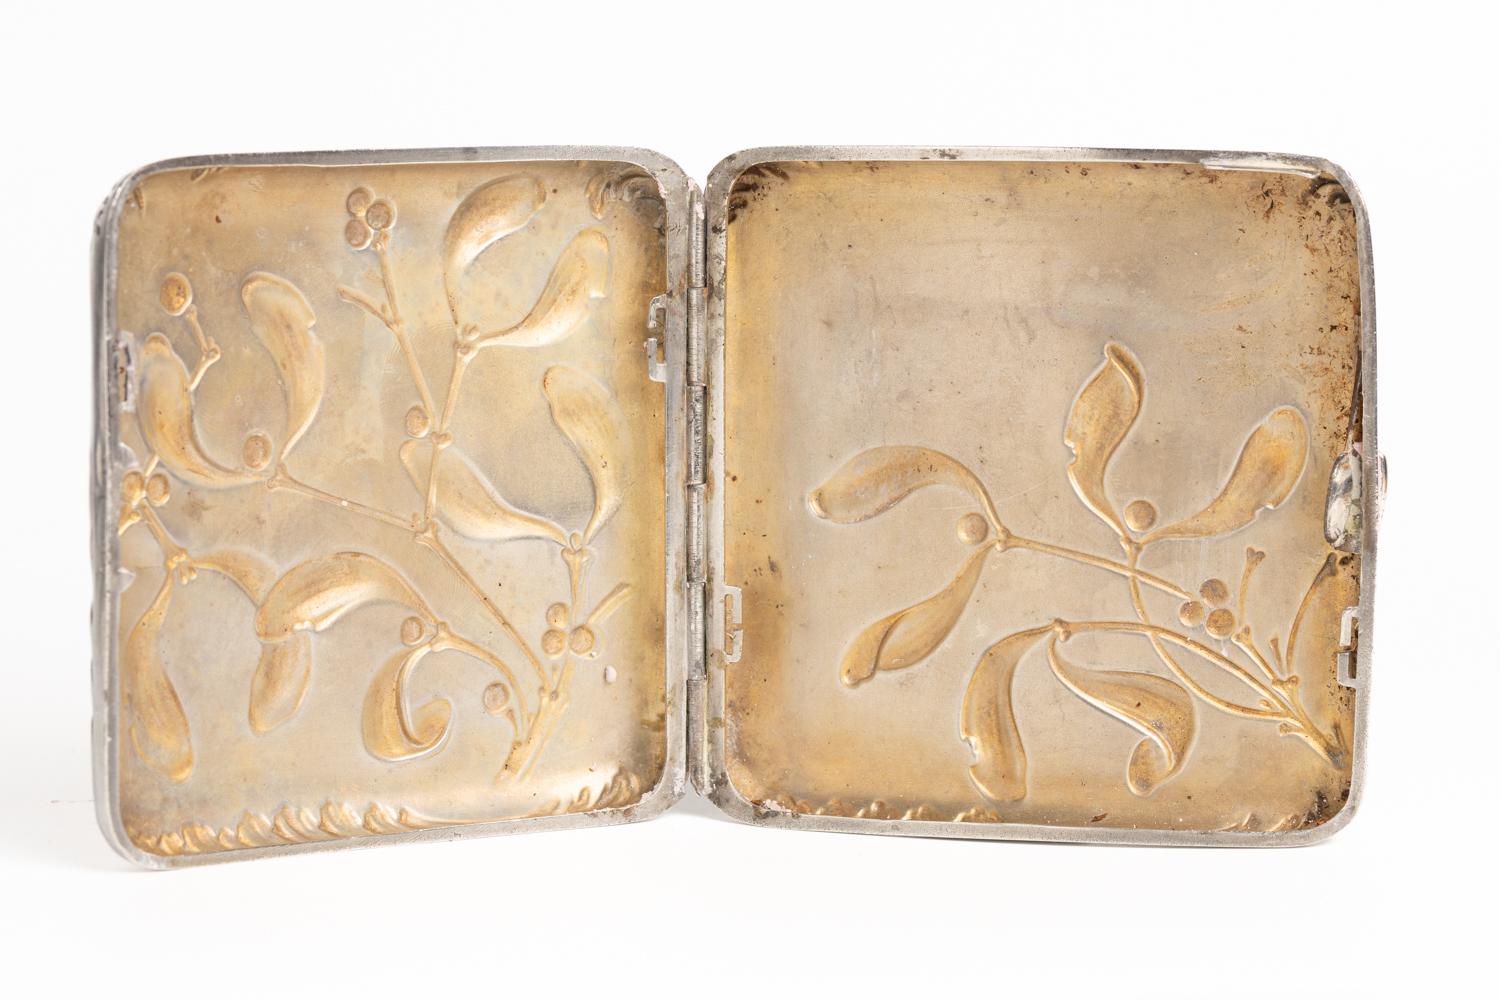  French Art Nouveau Silver Cigarette Case By Charles Murat For Sale 6